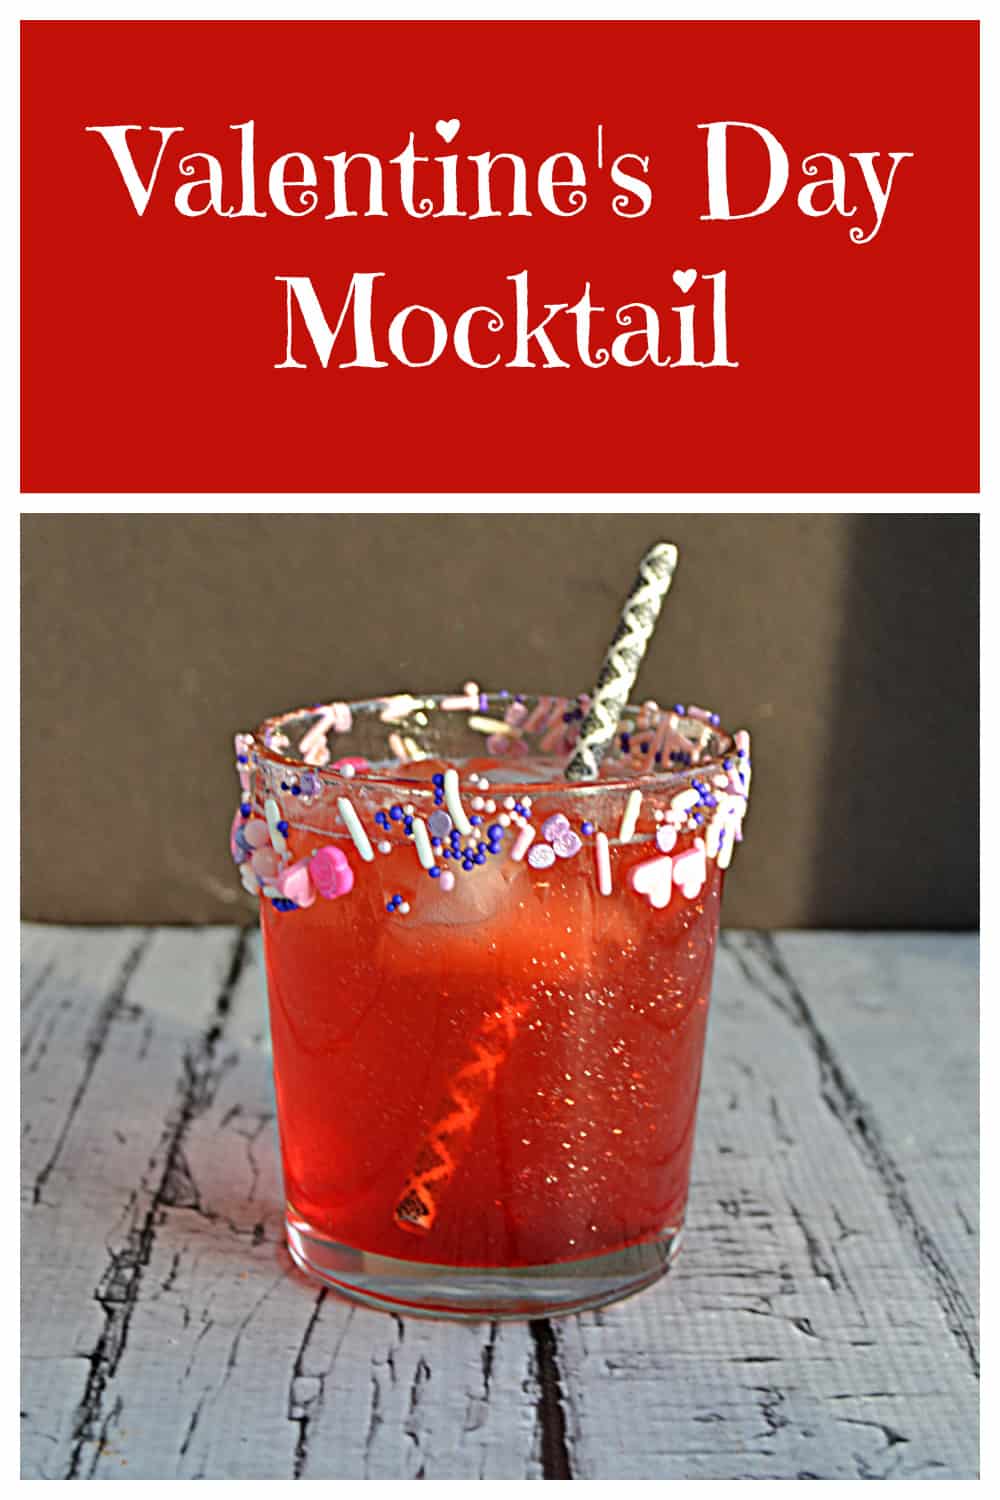 Pin Image: Text title, a glass of berry mocktail with sprinkles around the rim.